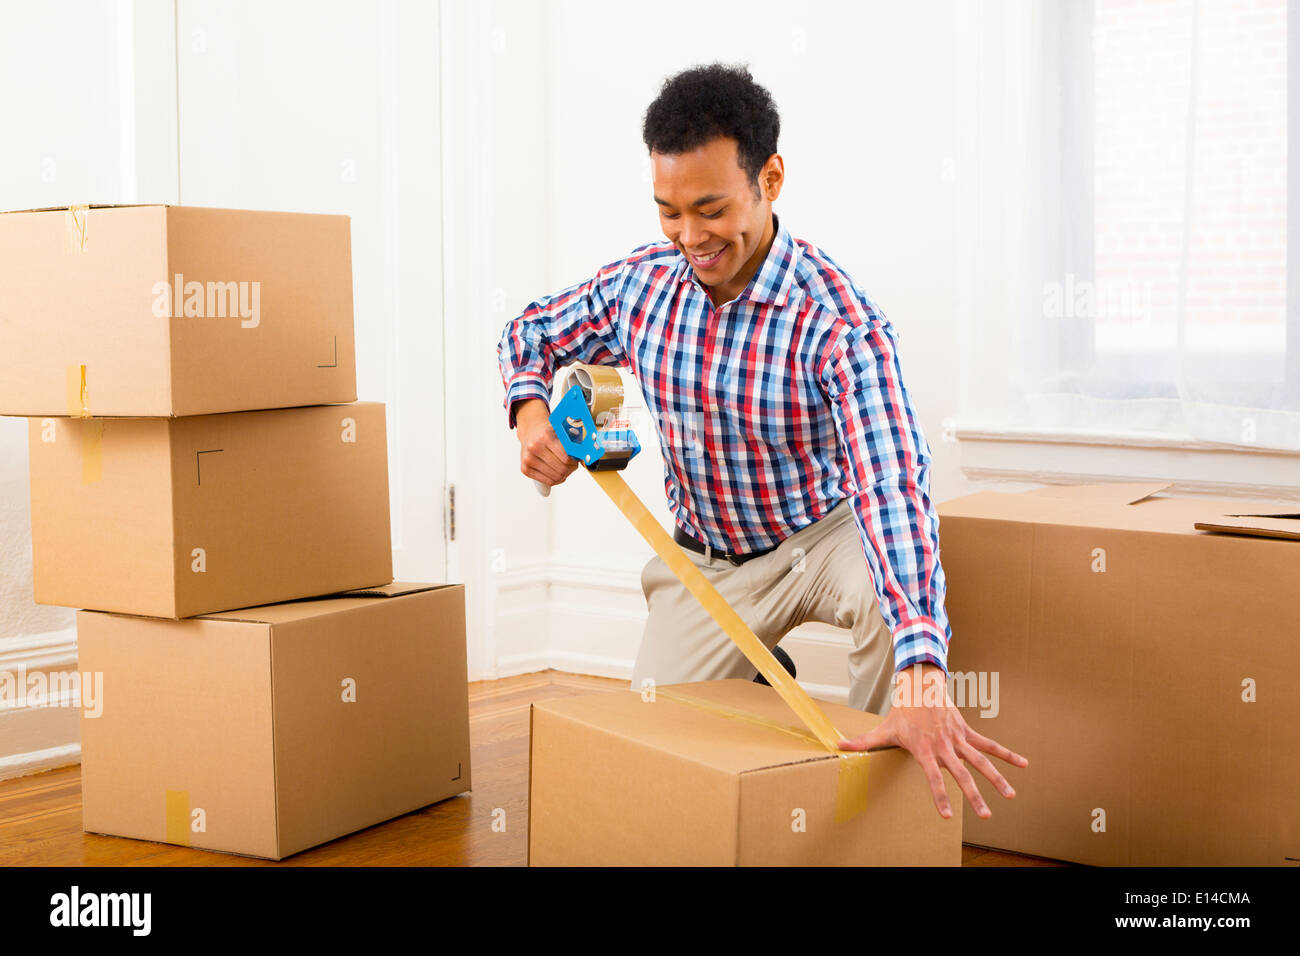 Mixed Race man packing cardboard boxes Banque D'Images